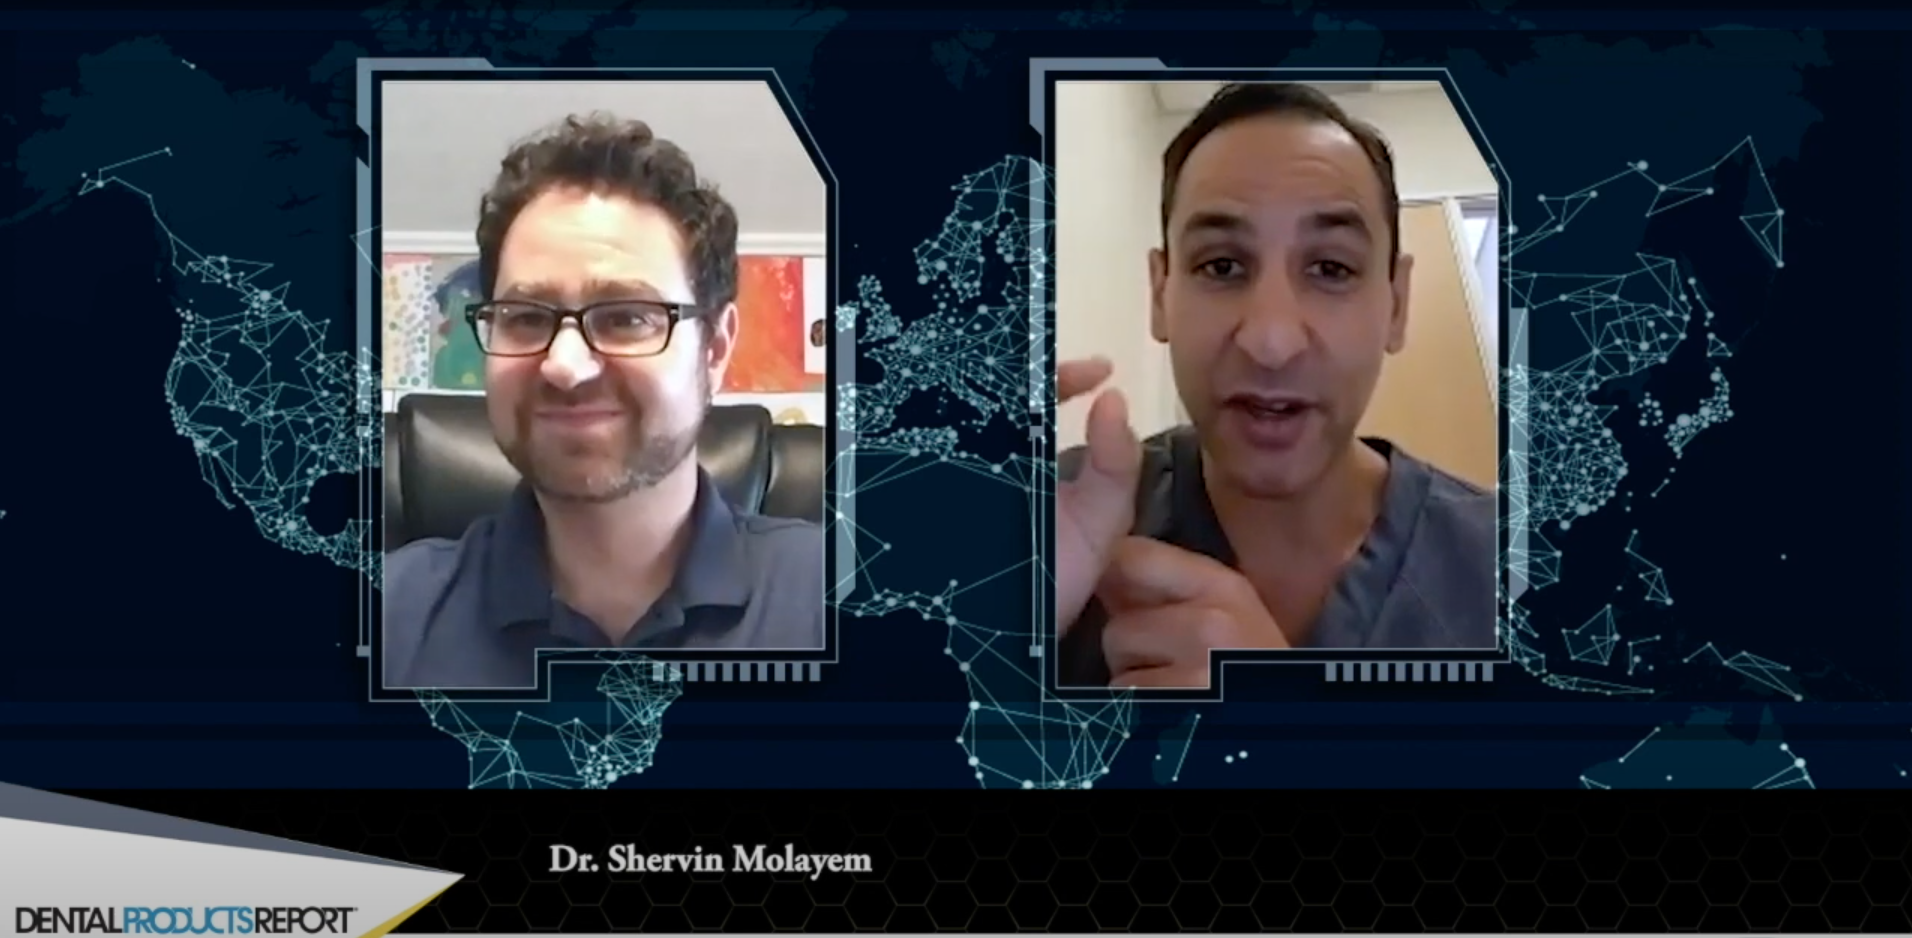 Interview with Dr. Shervin Molayem